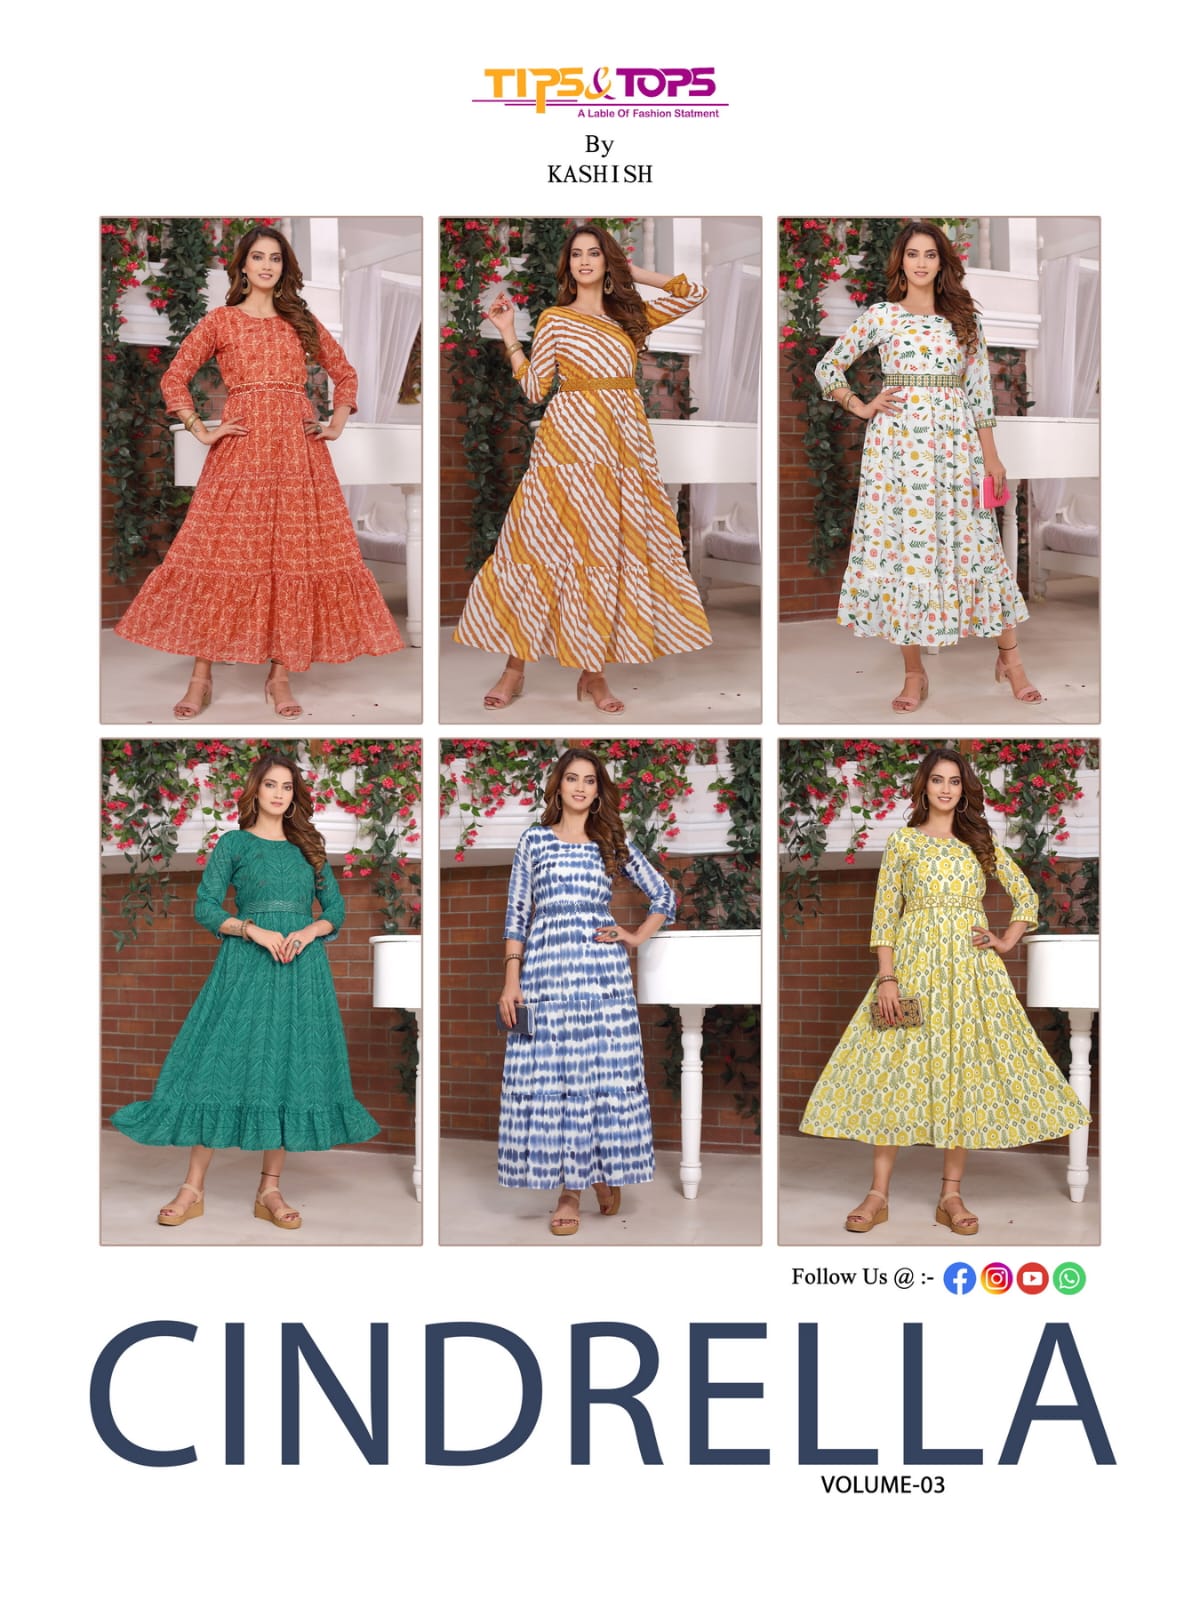 Tips And Tops Cindrella Vol 3 collection 4